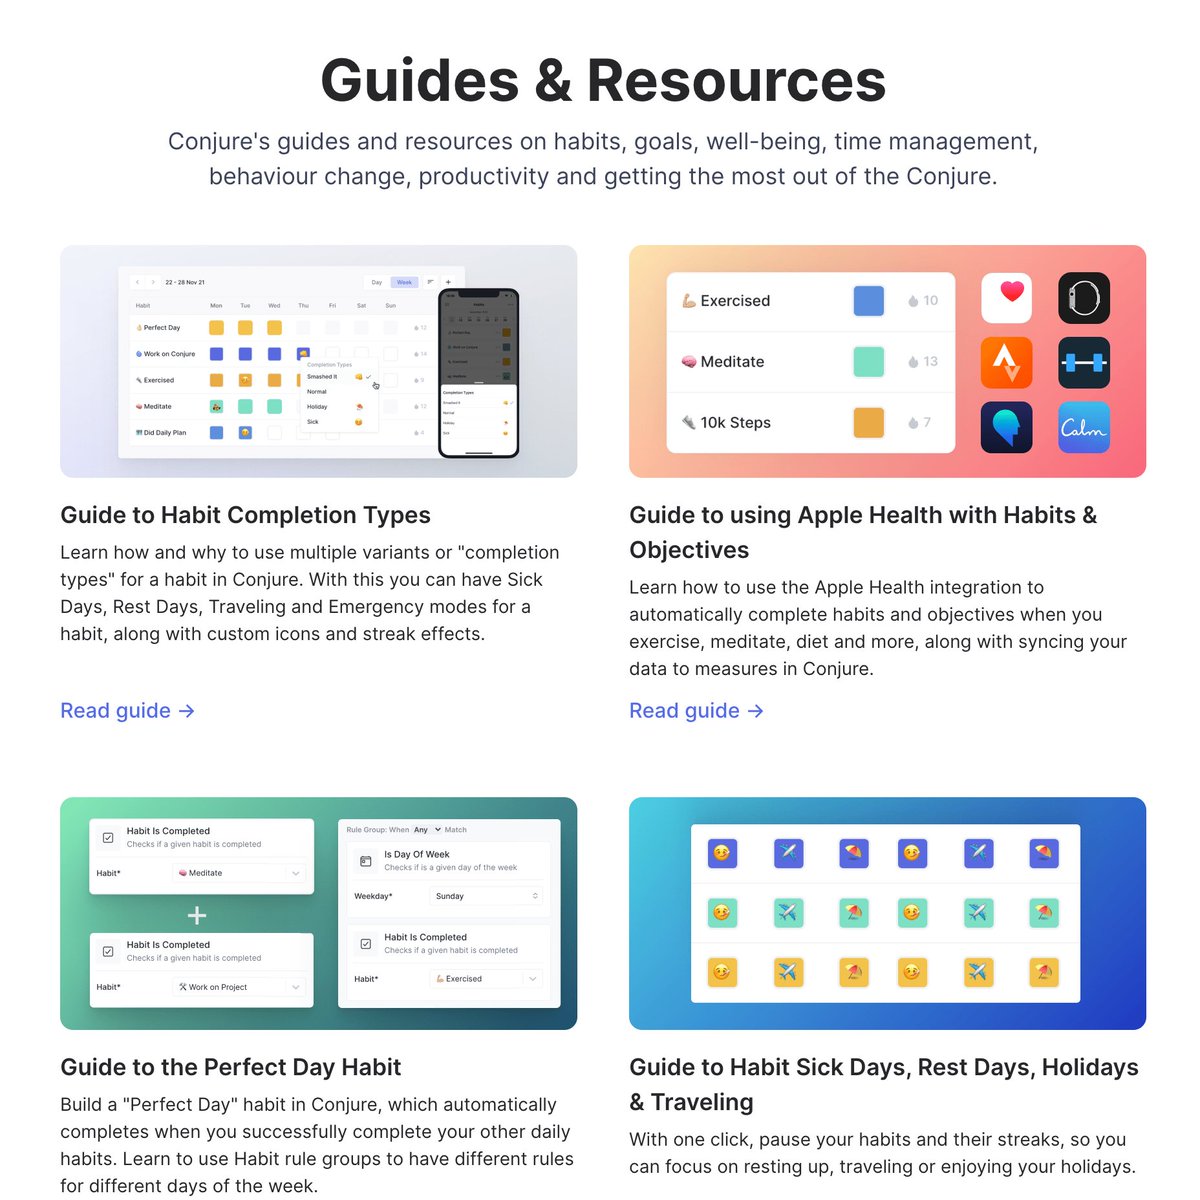 In case you haven't seen, we have guides to using Conjure here: conjure.so/guides While we love all our guides equally, like many parents, we do have a favorite 'Guide to Time based Habits & Objectives': conjure.so/guides/time-ba…